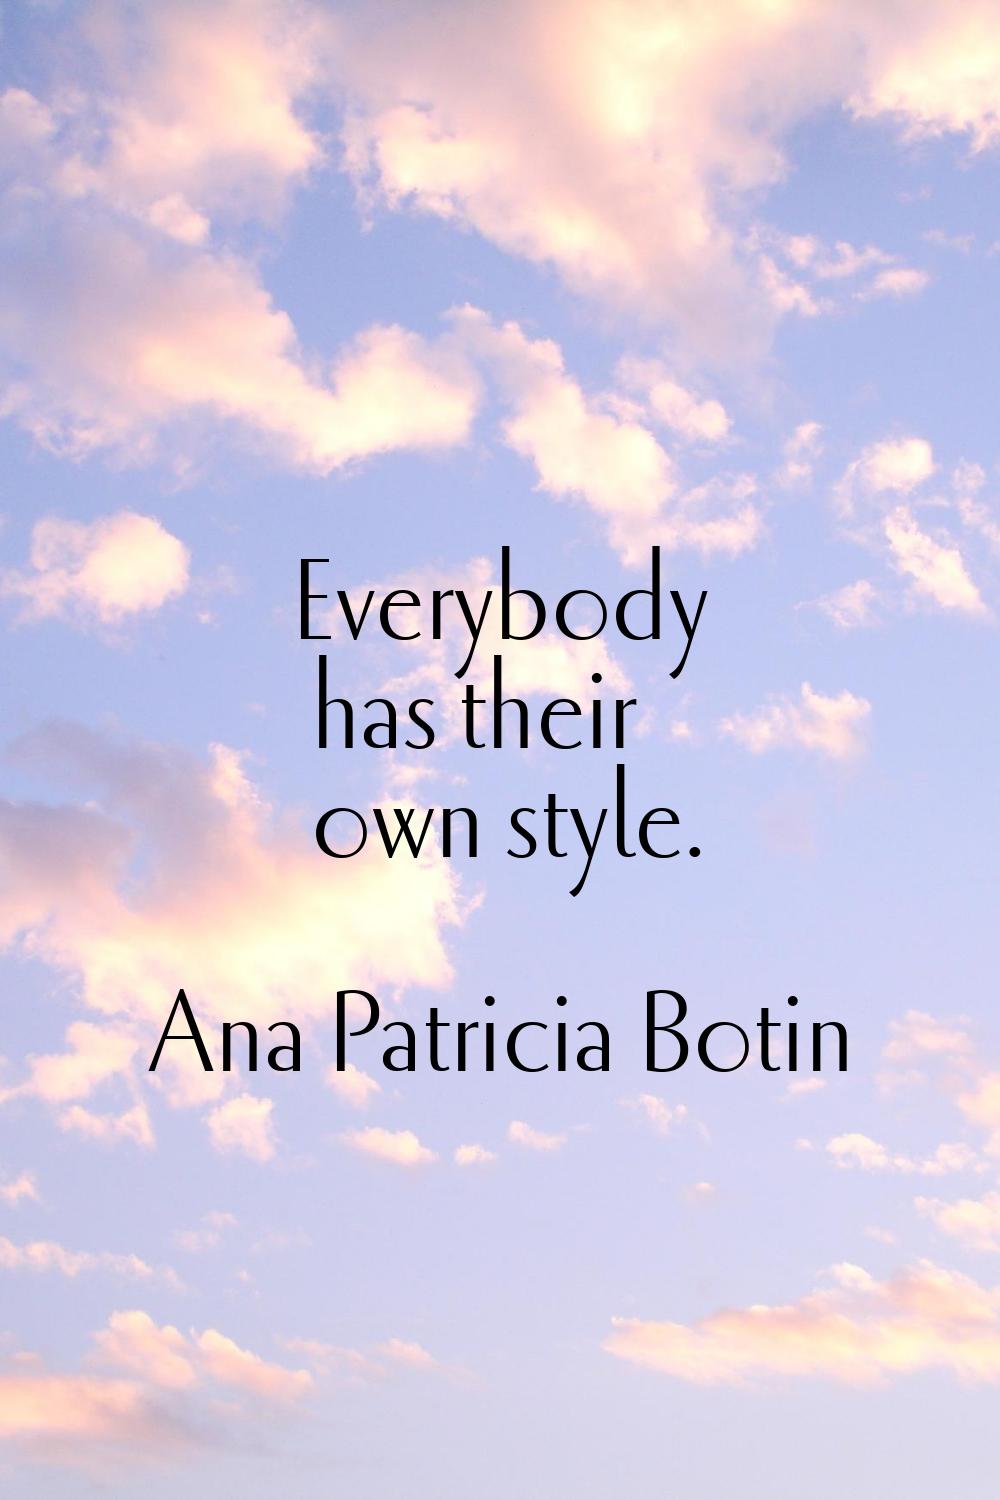 Everybody has their own style.